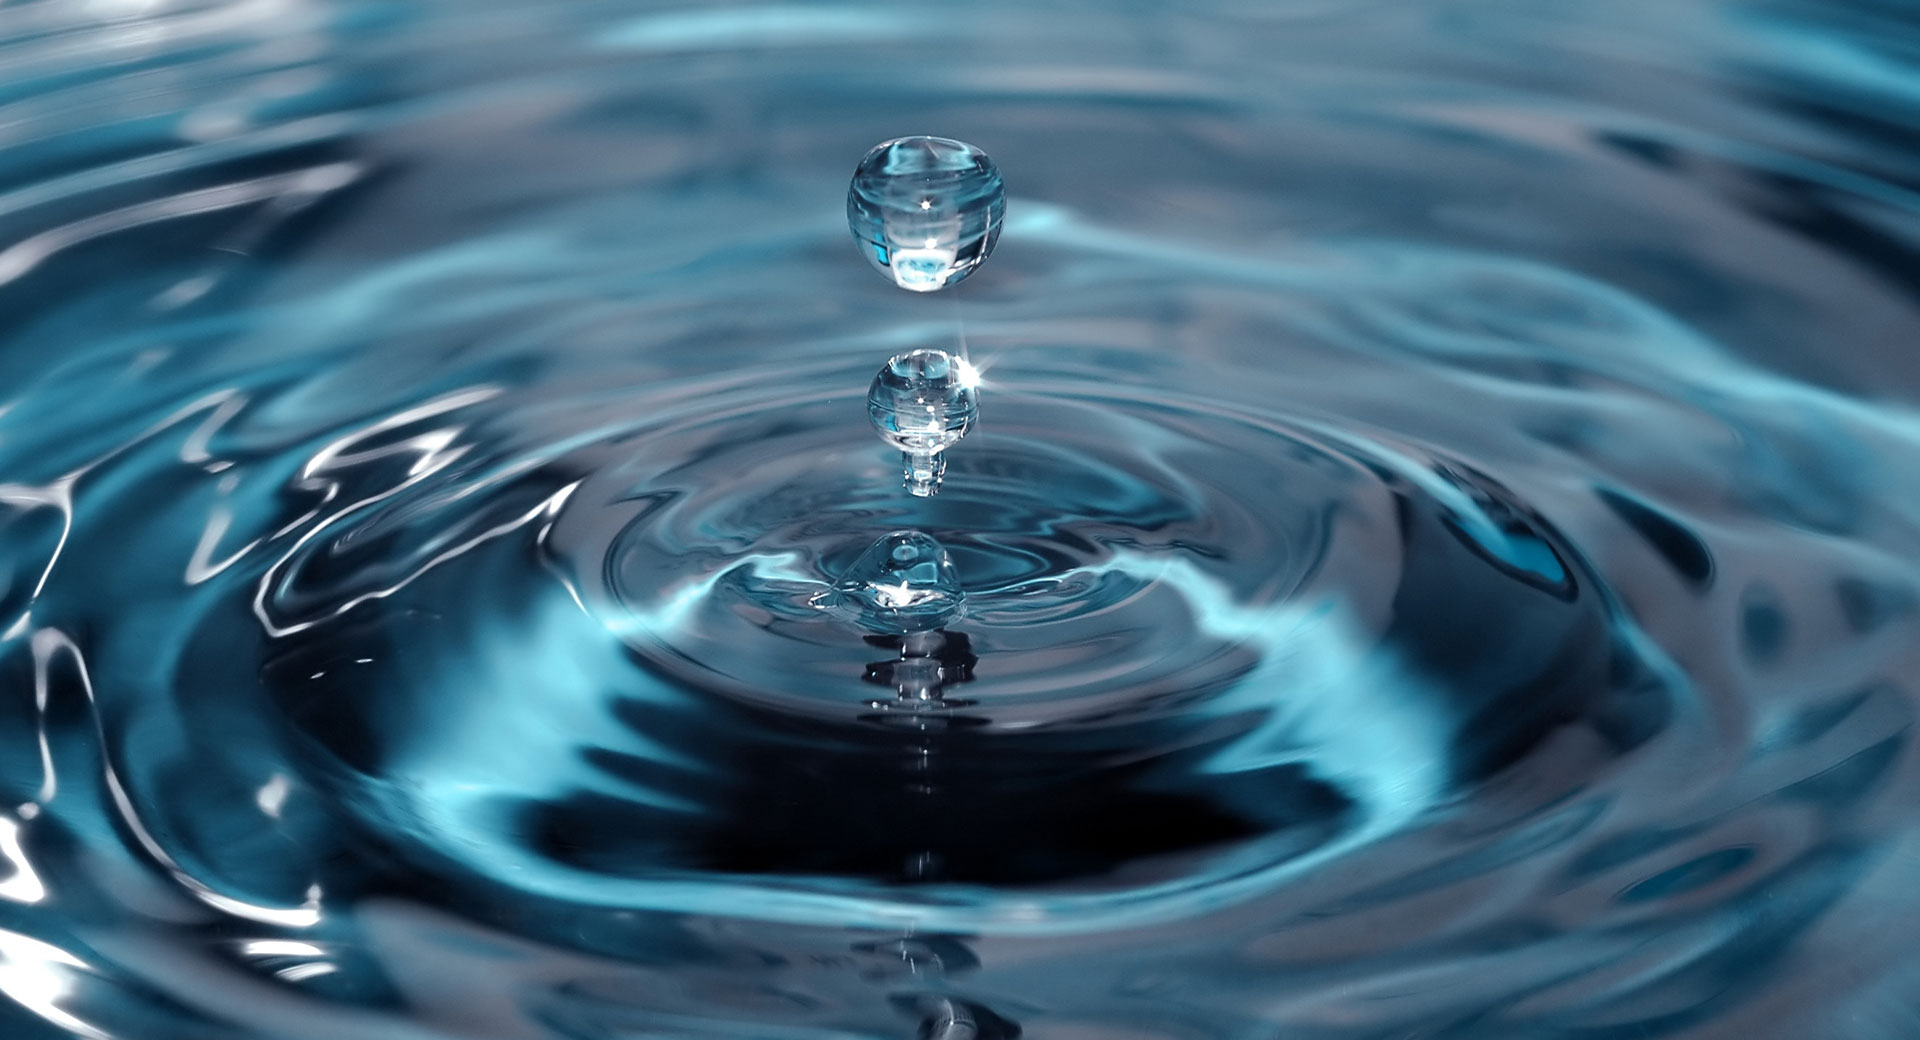 A close-up of water dripping and creating ripples in a pool of water